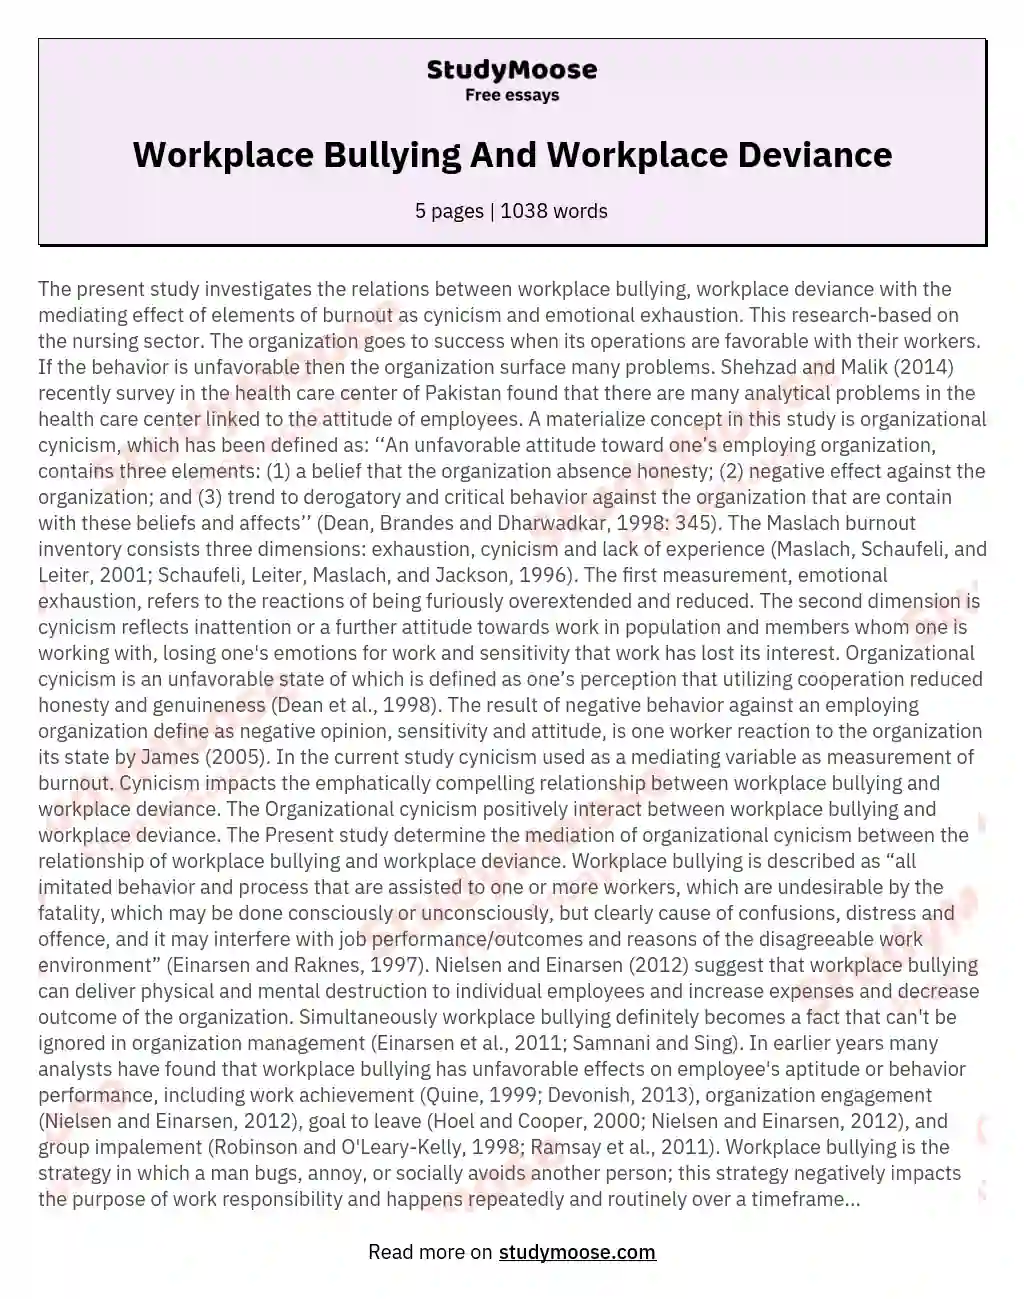 Workplace Bullying And Workplace Deviance